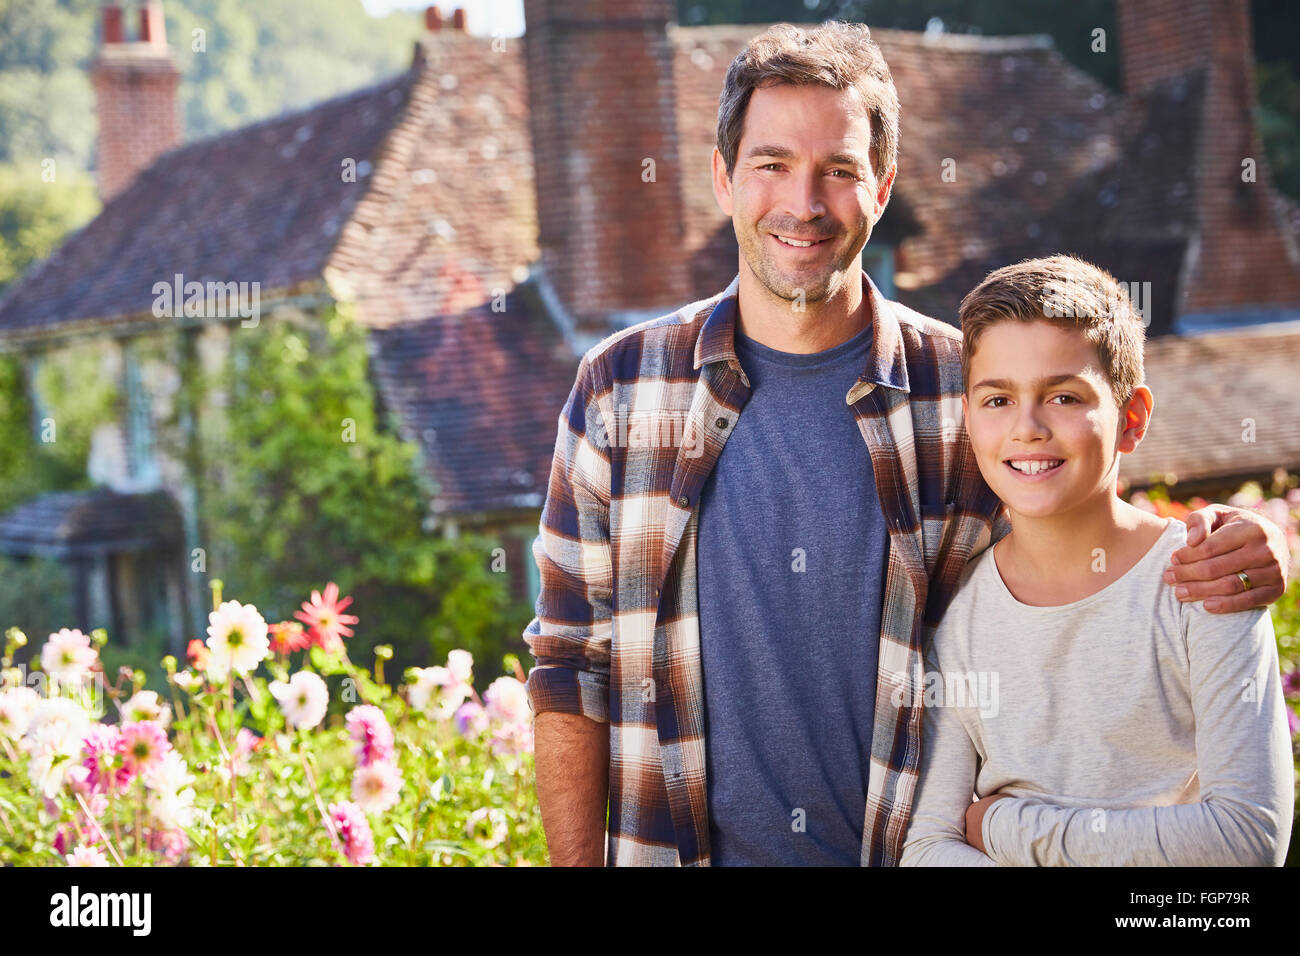 Portrait smiling father and son in sunny flower garden Stock Photo